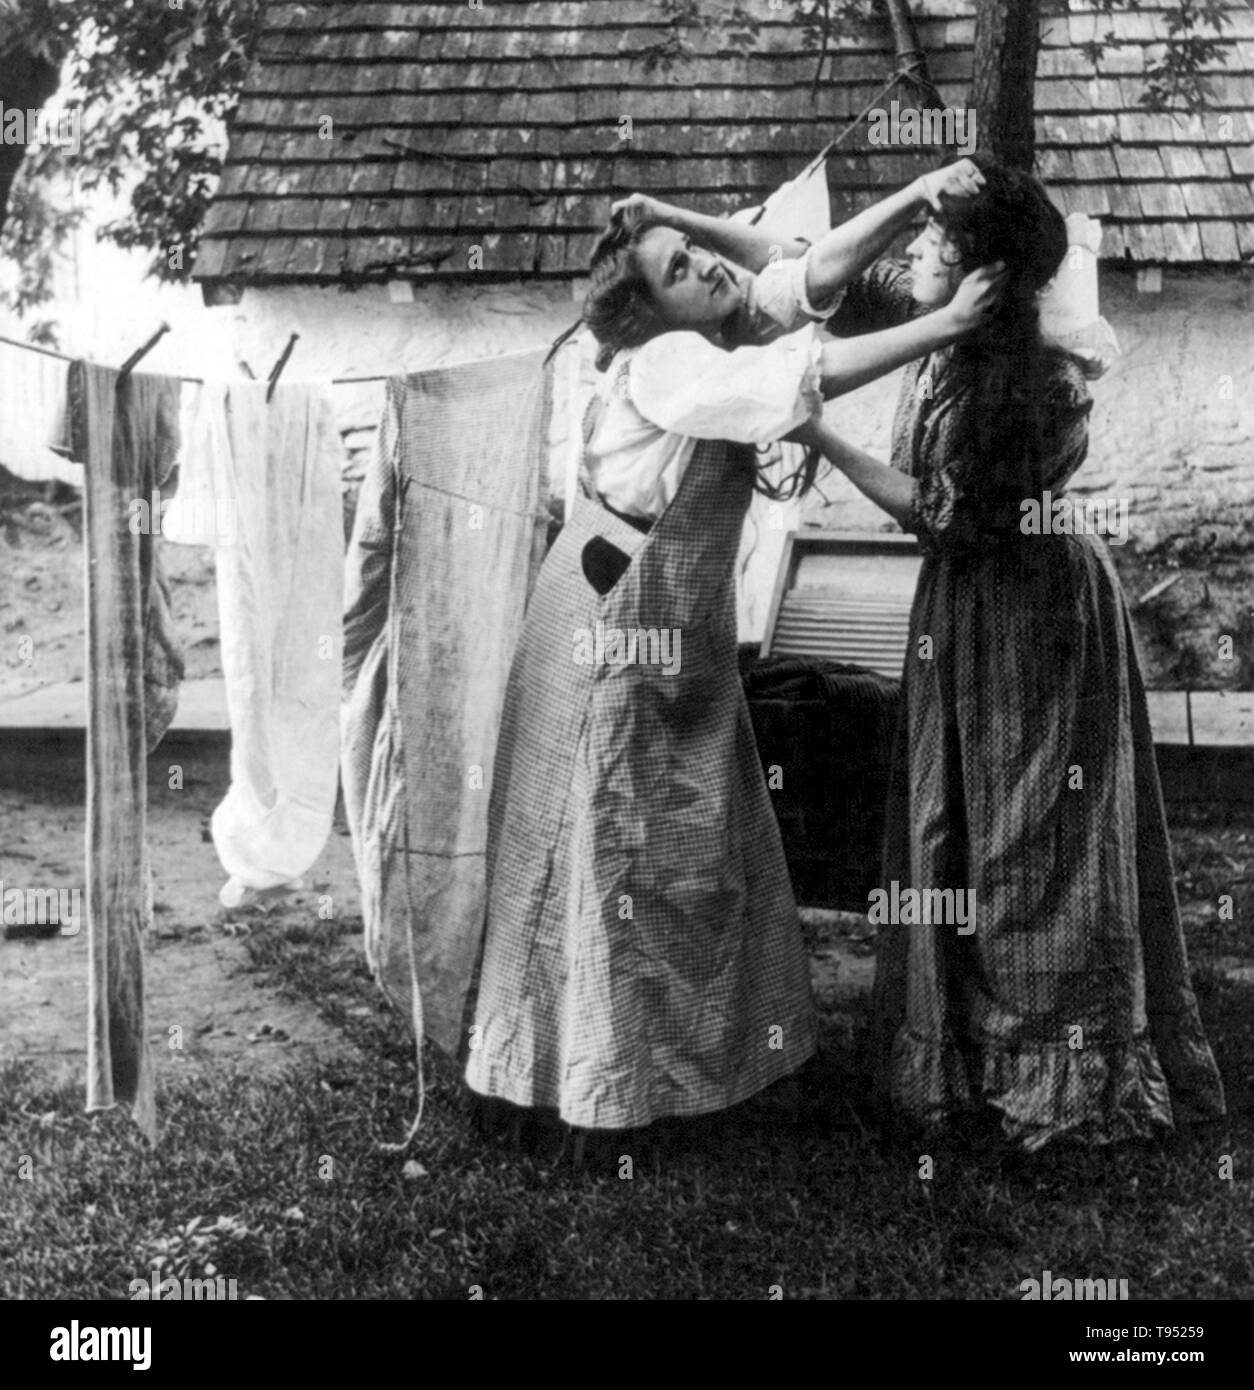 Entitled: 'Trouble on the line' shows two women pulling each other's hair in front of clothesline. Cropped stereograph photographed by E.W. Kelley, 1906. Stock Photo